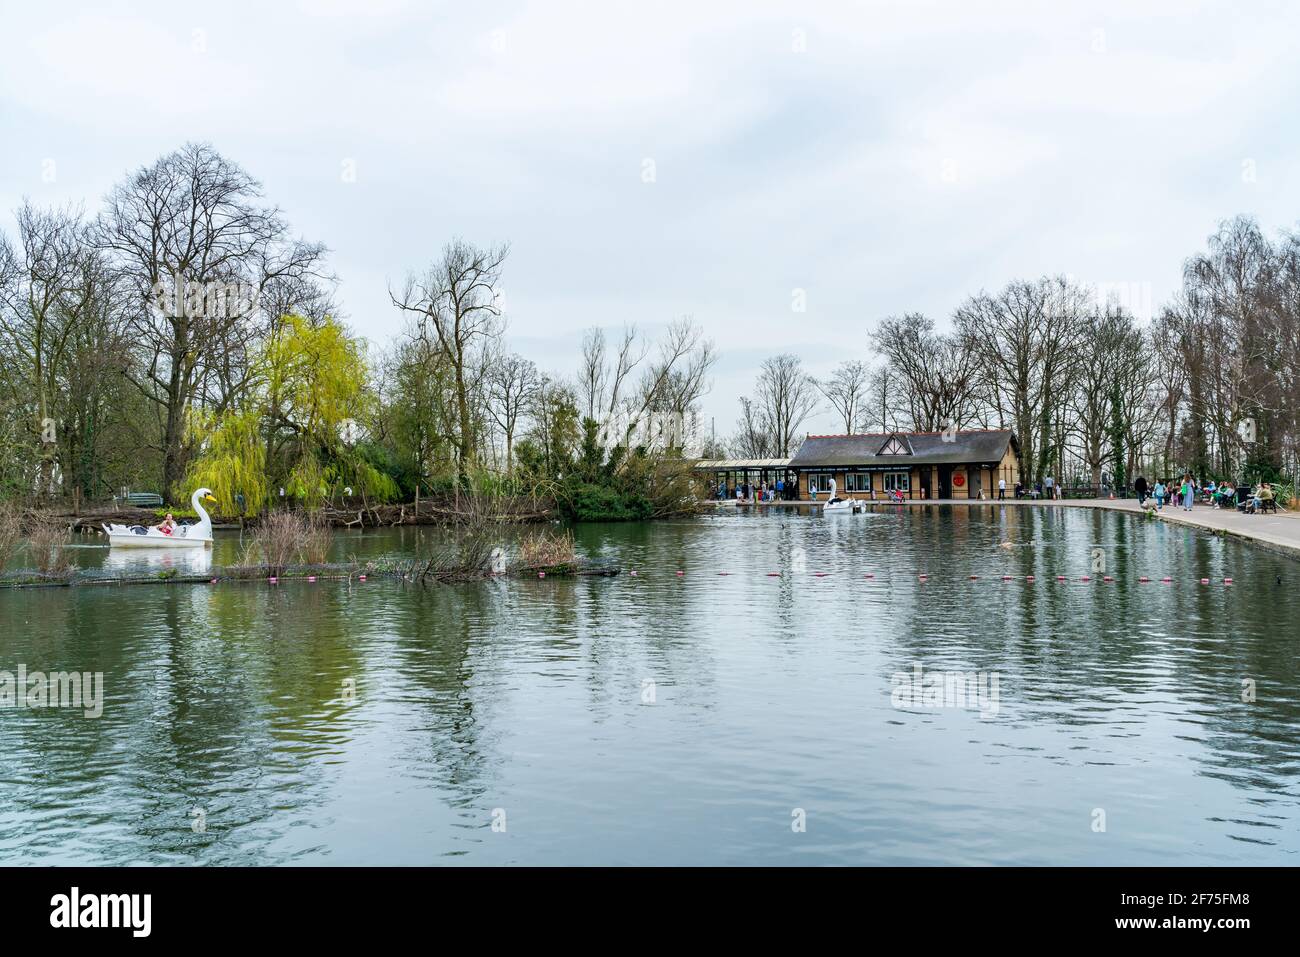 LONDON, UK - MARCH 31 2021: View of boating lake with Lakeside Café and pedal boats on at Alexandra Palace in London Stock Photo